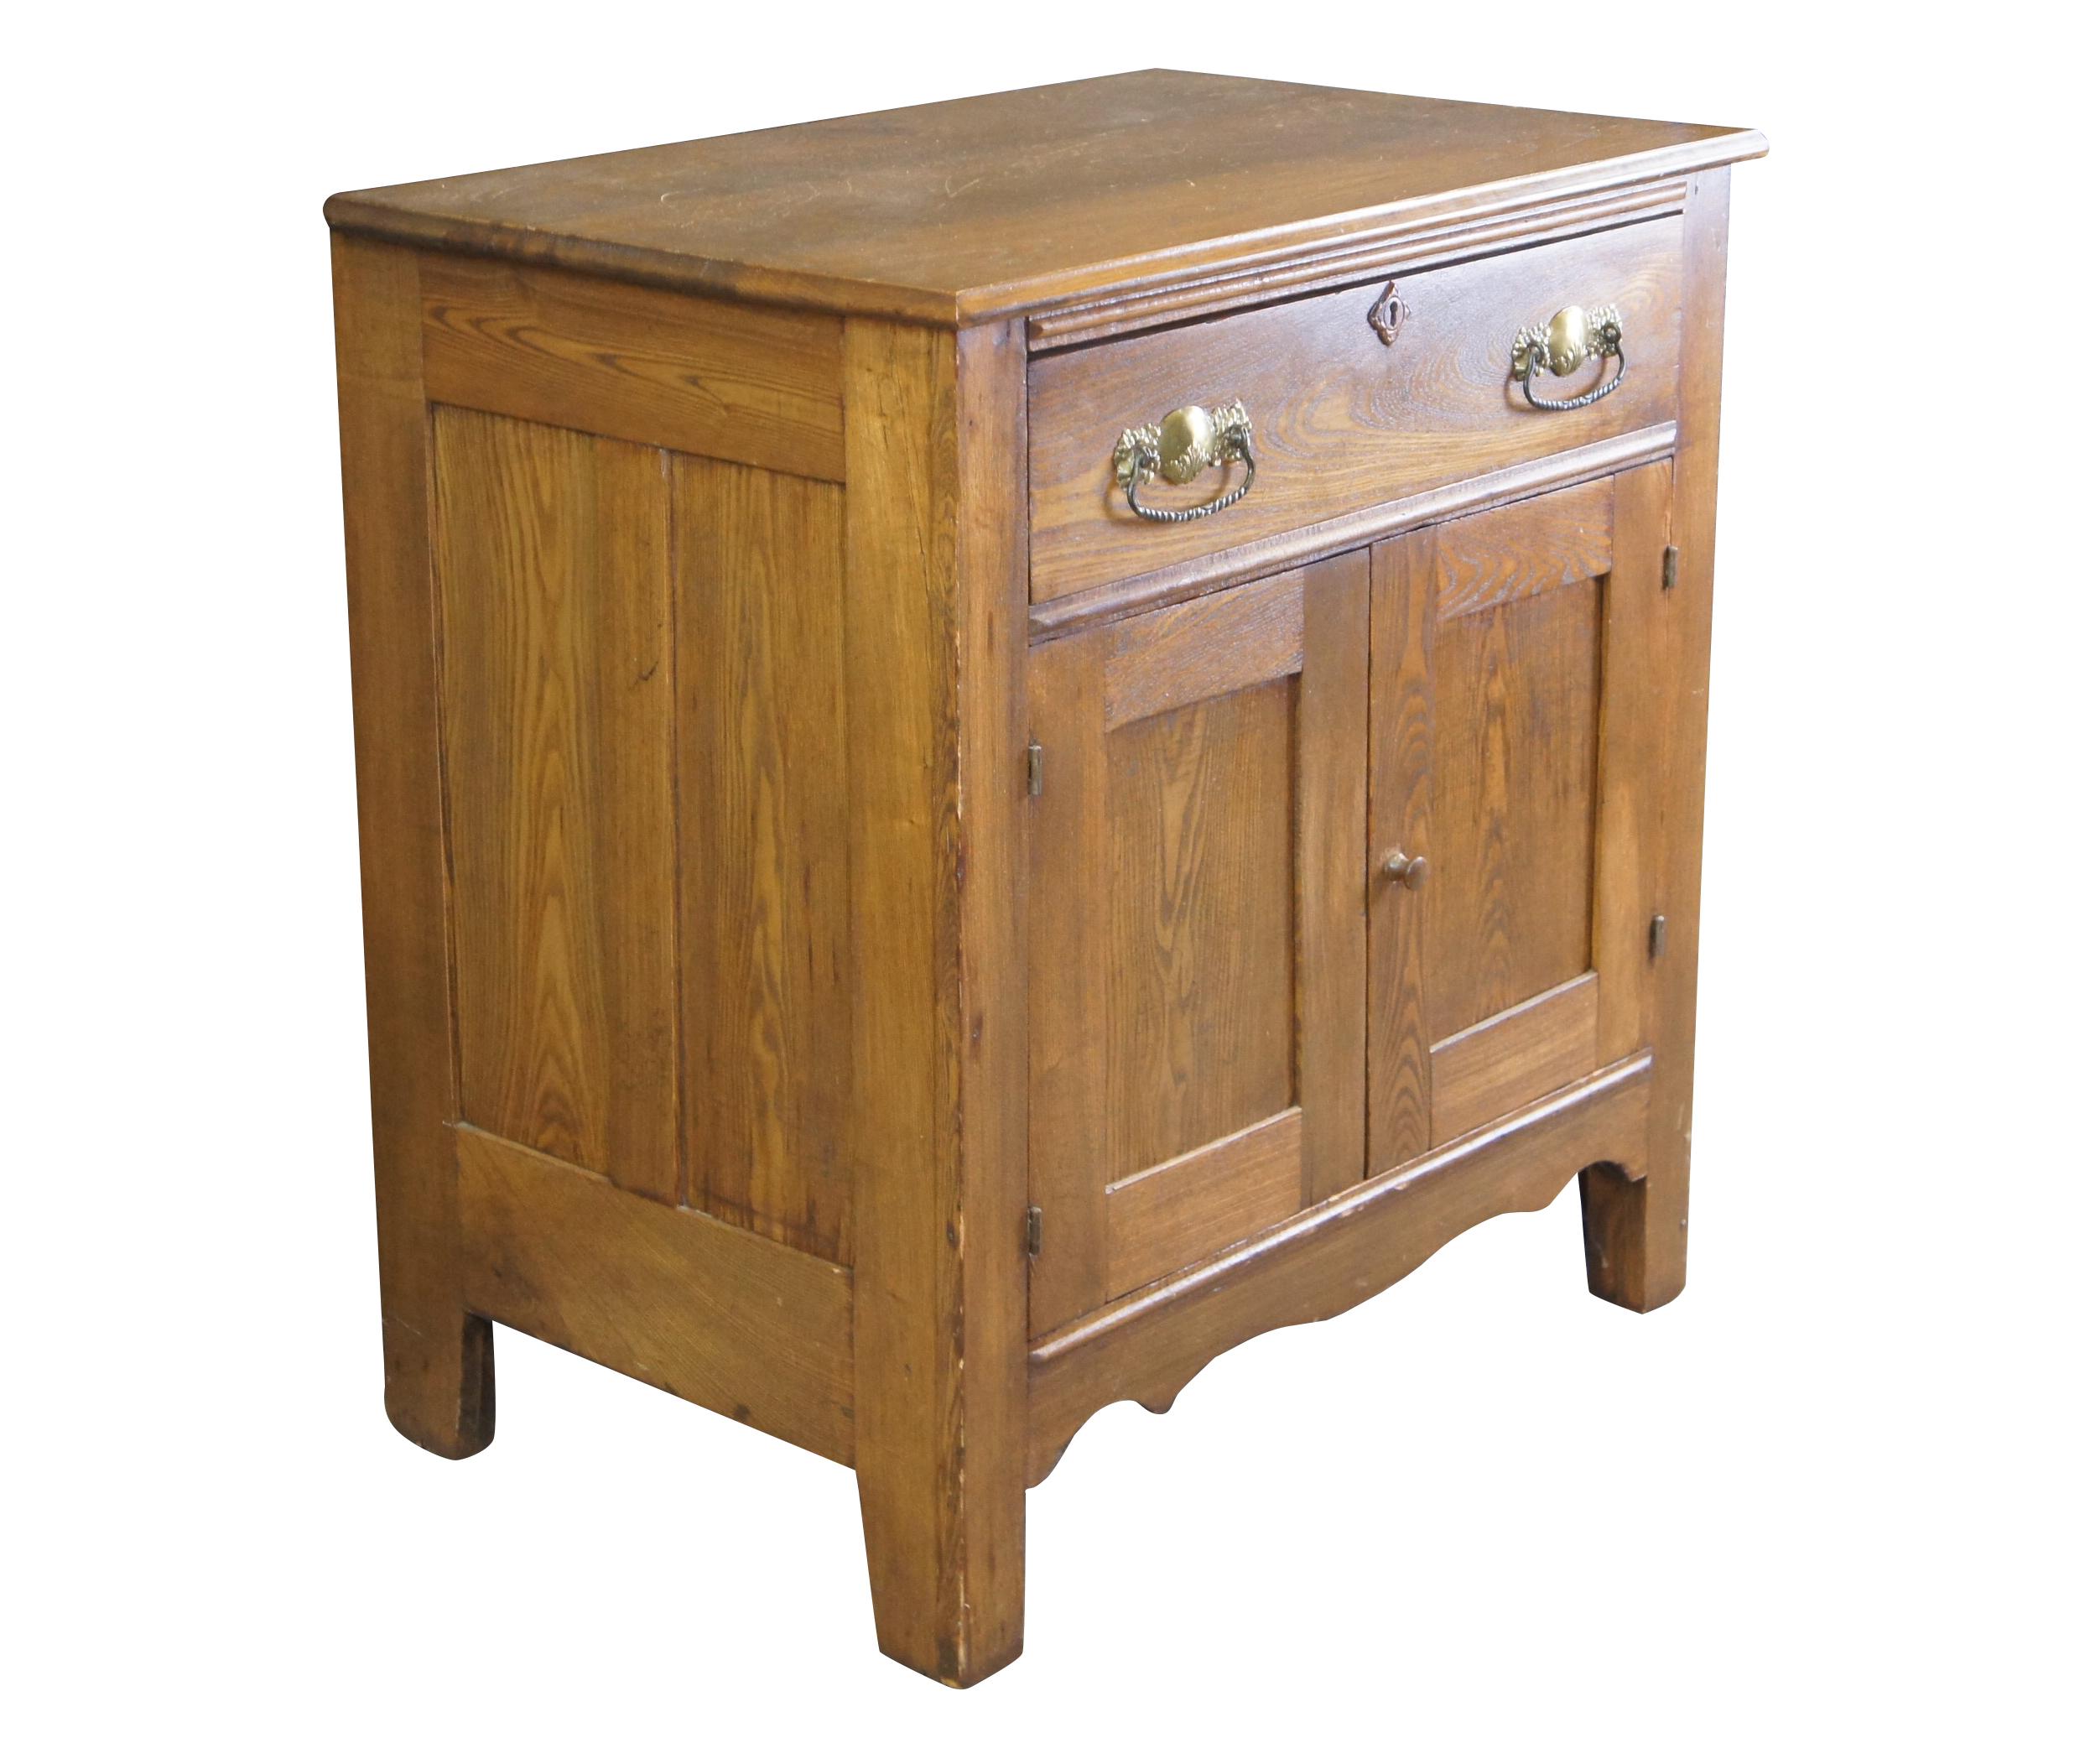 A quaint Victorian Era Washstand.  Made from oak with one dovetailed drawer featuring ornate brass hardware and lower cabinet for storage.  The drawer has a neat diamond carved key escutcheon